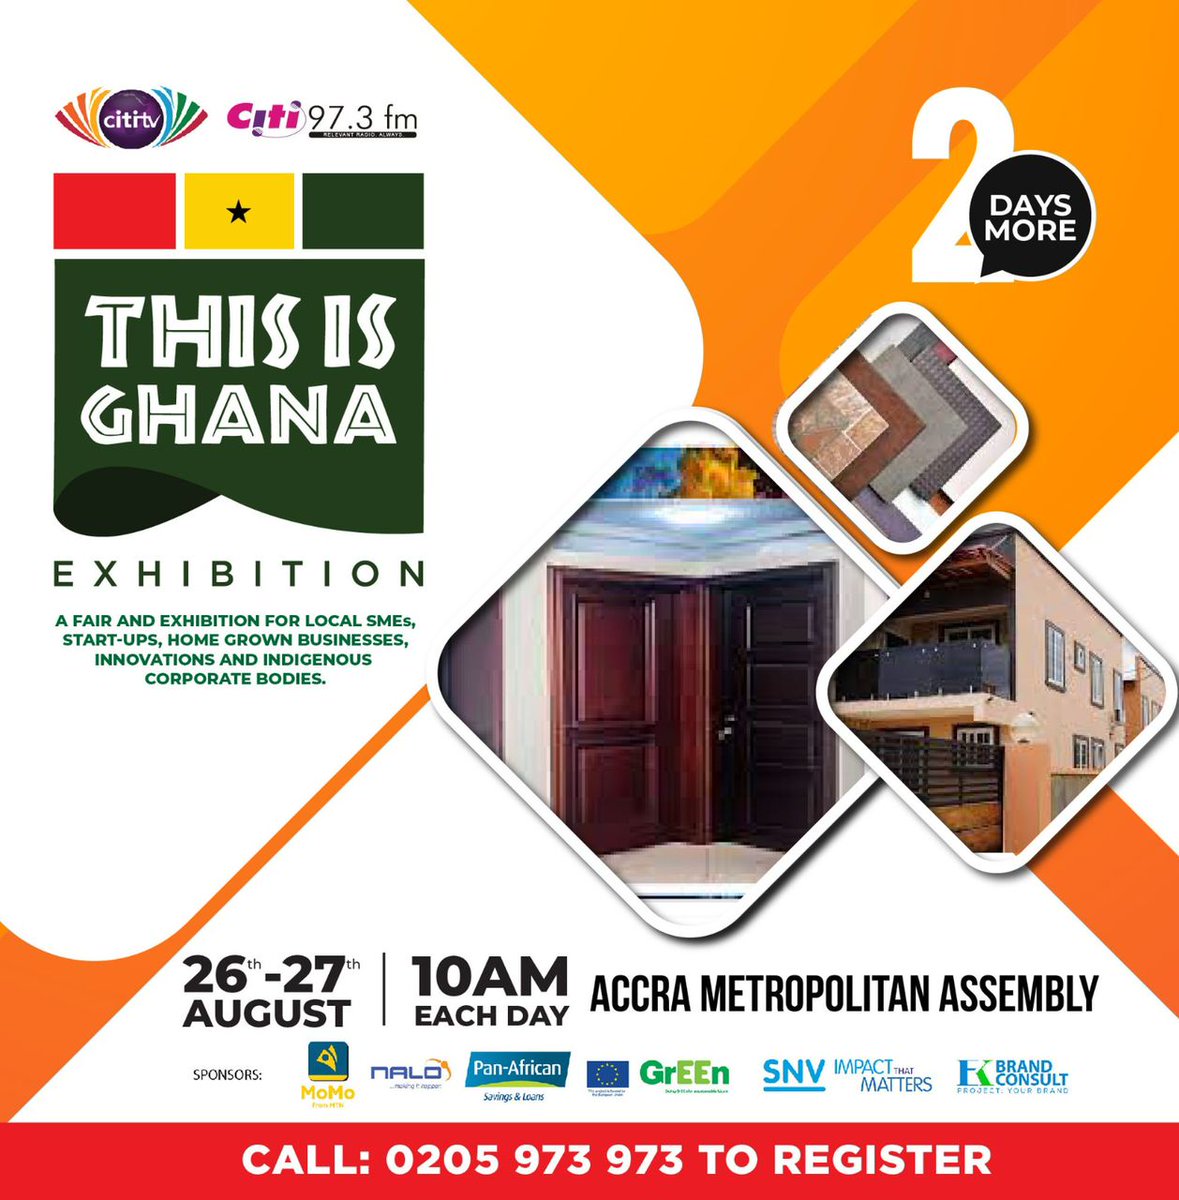 The countdown for the This Is Ghana exhibition 2023 is on! 2 days more to go! Don’t miss this 2-day opportunity to promote your Made-In-Ghana products, services, innovations and more. Register your company and pay to be a part of it.
#ThisIsGhana